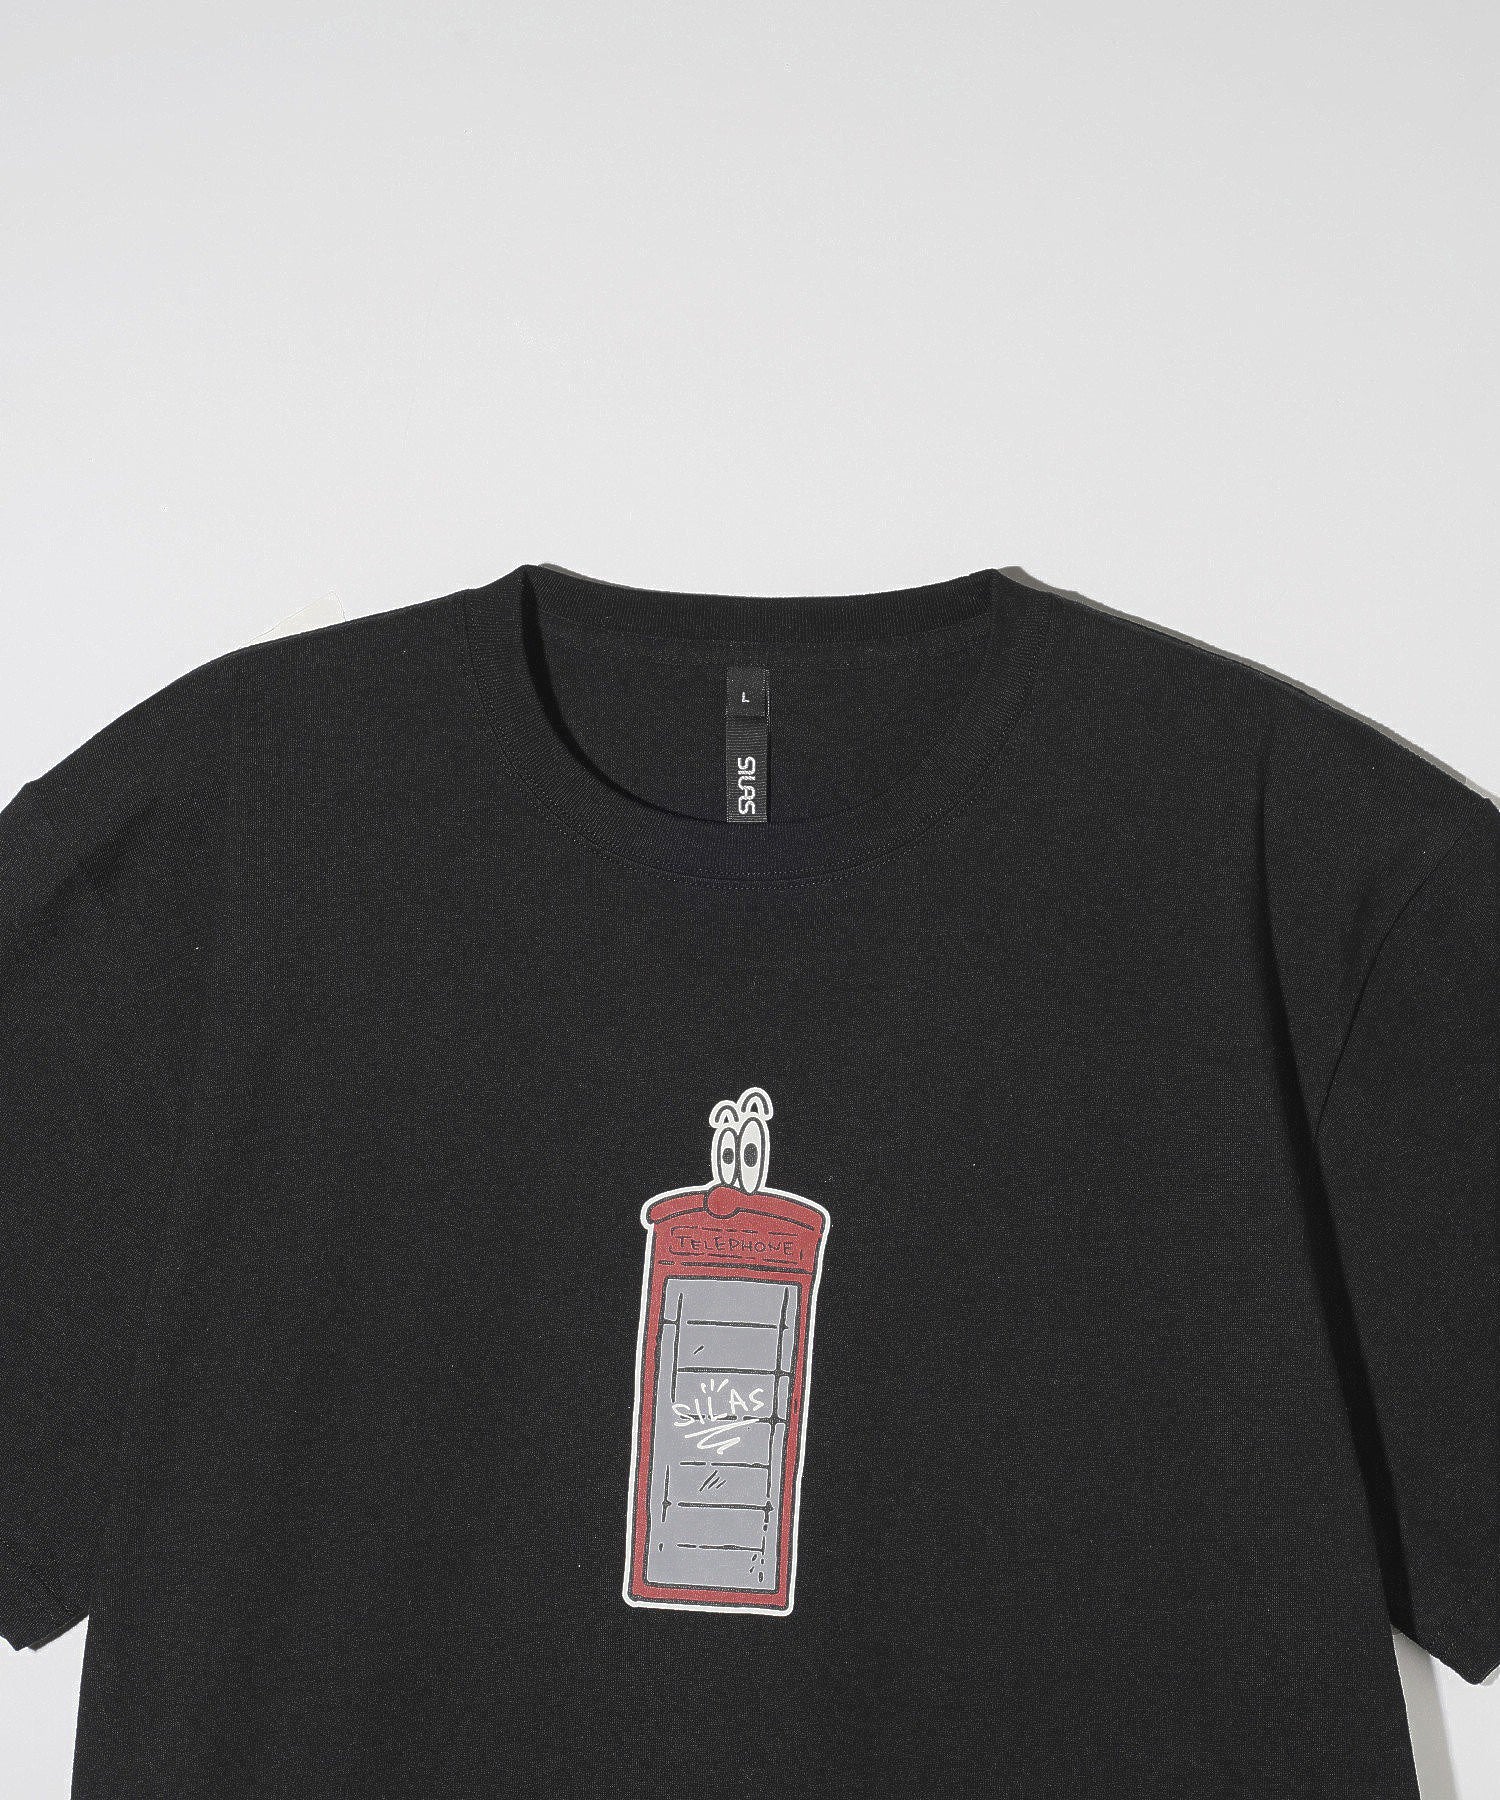 SILASxMAW PHONE BOOTH S/S TEE